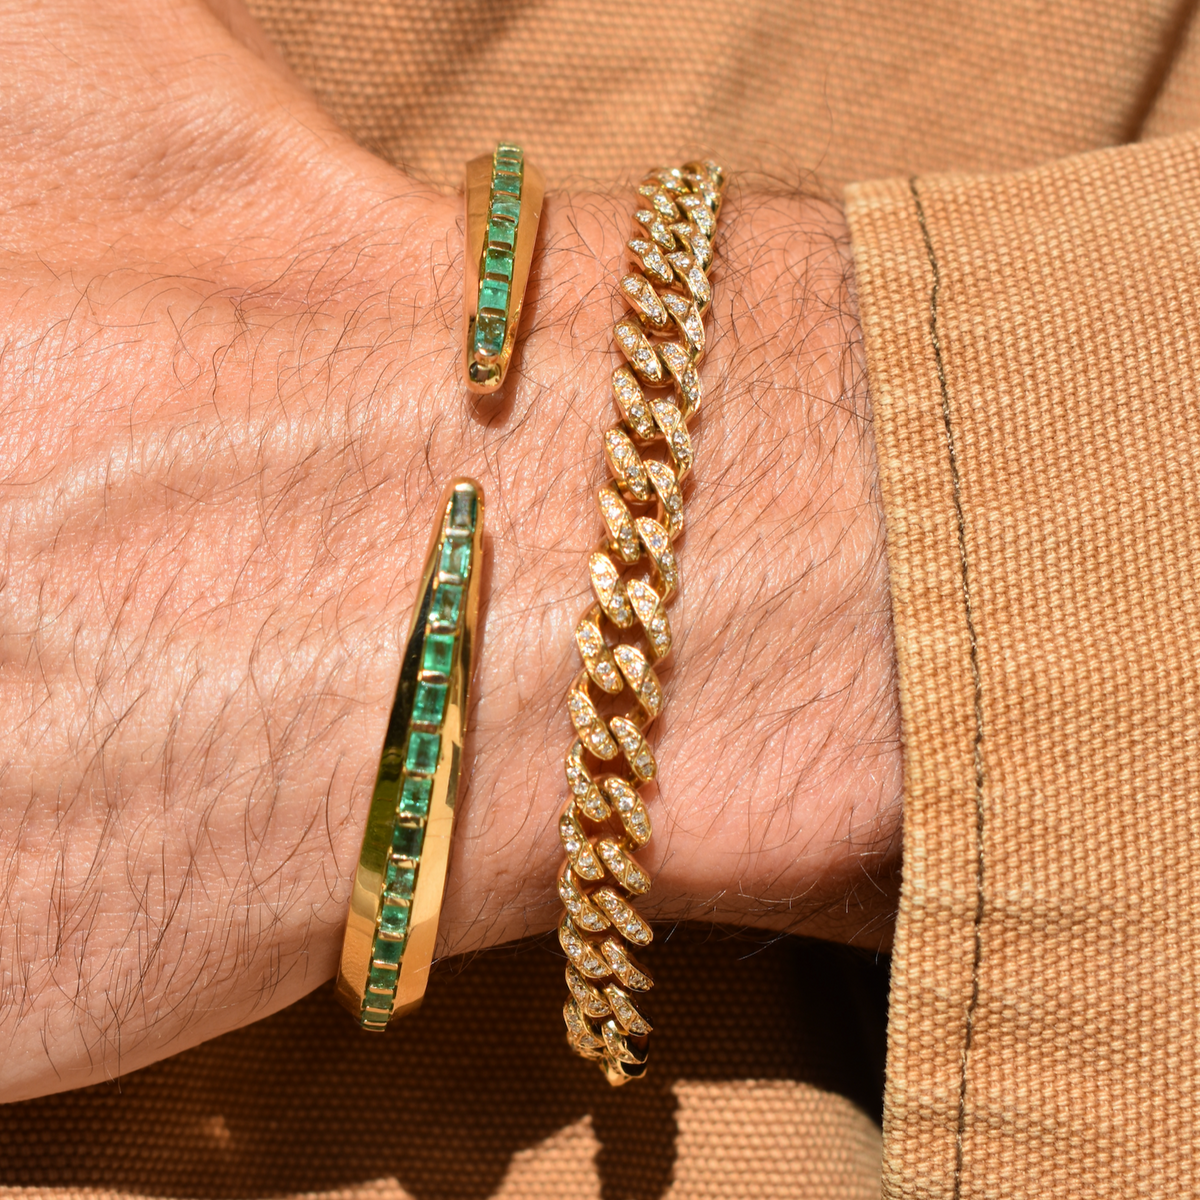 READY TO SHIP MEN'S EMERALD BAGUETTE SNAKE TAIL CUFF